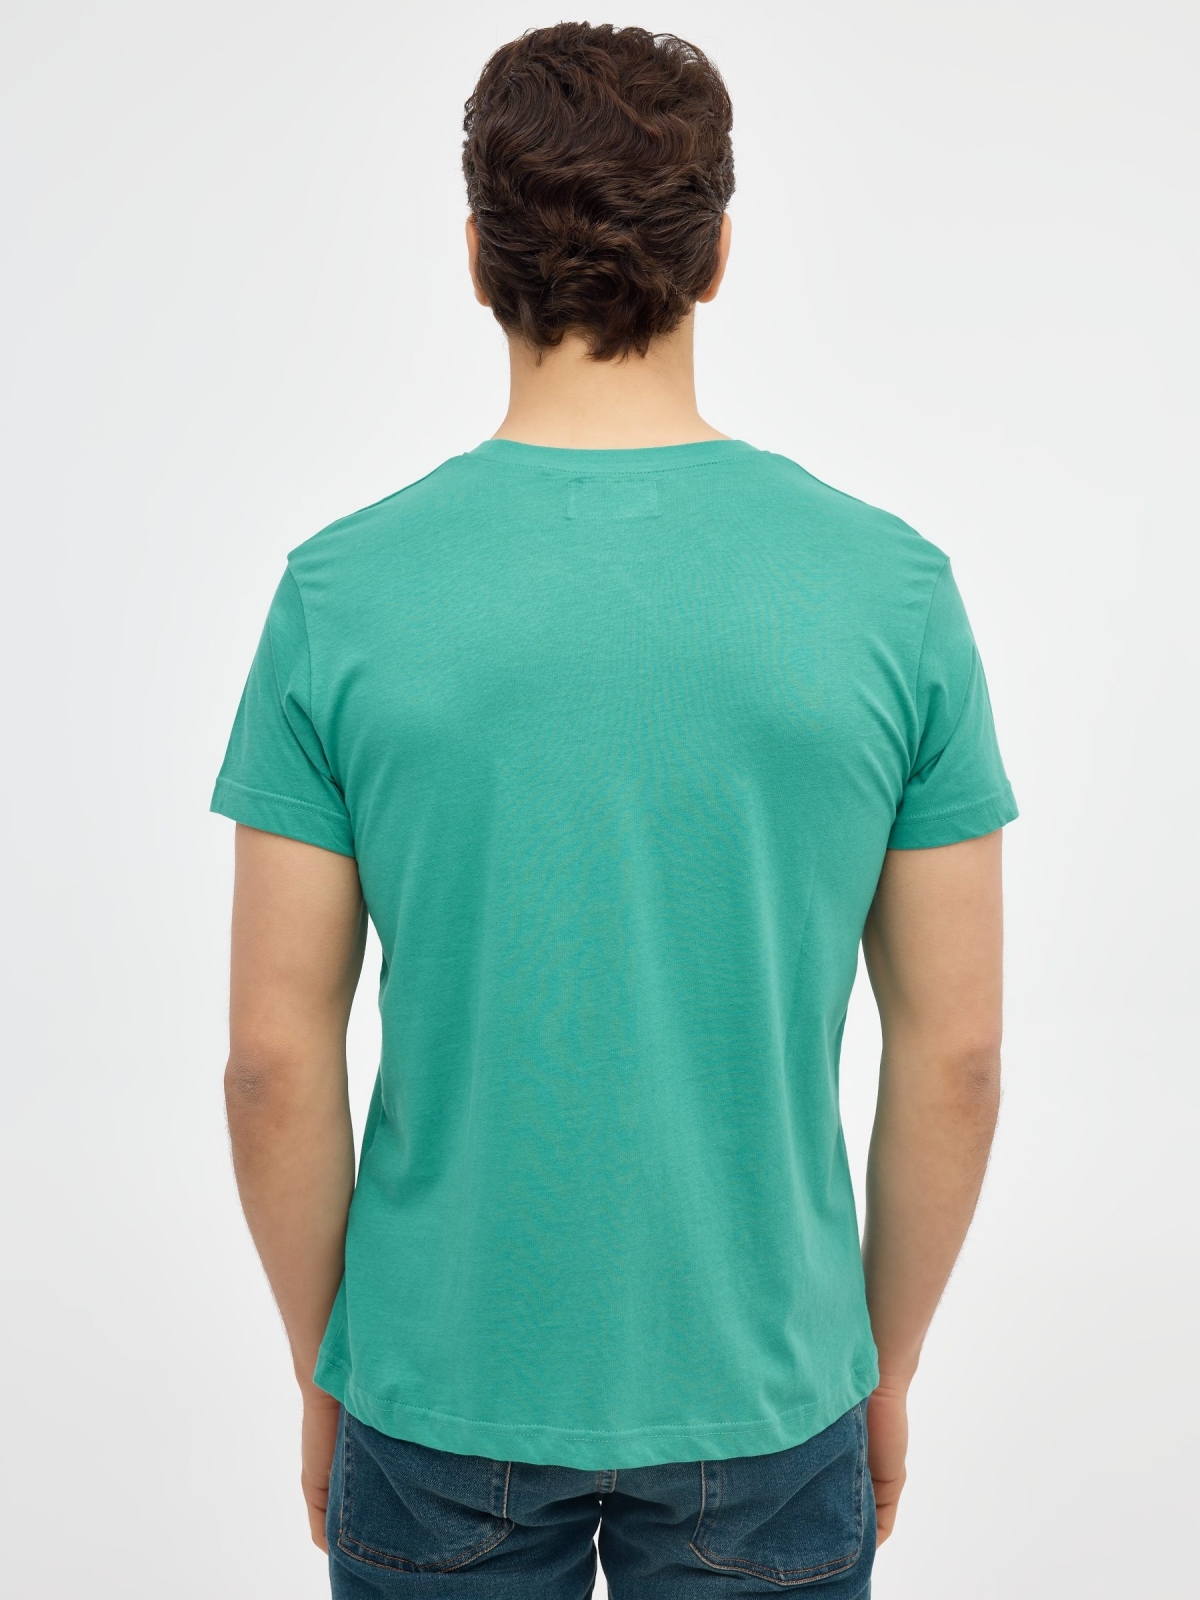 Basic short sleeve t-shirt water green middle back view